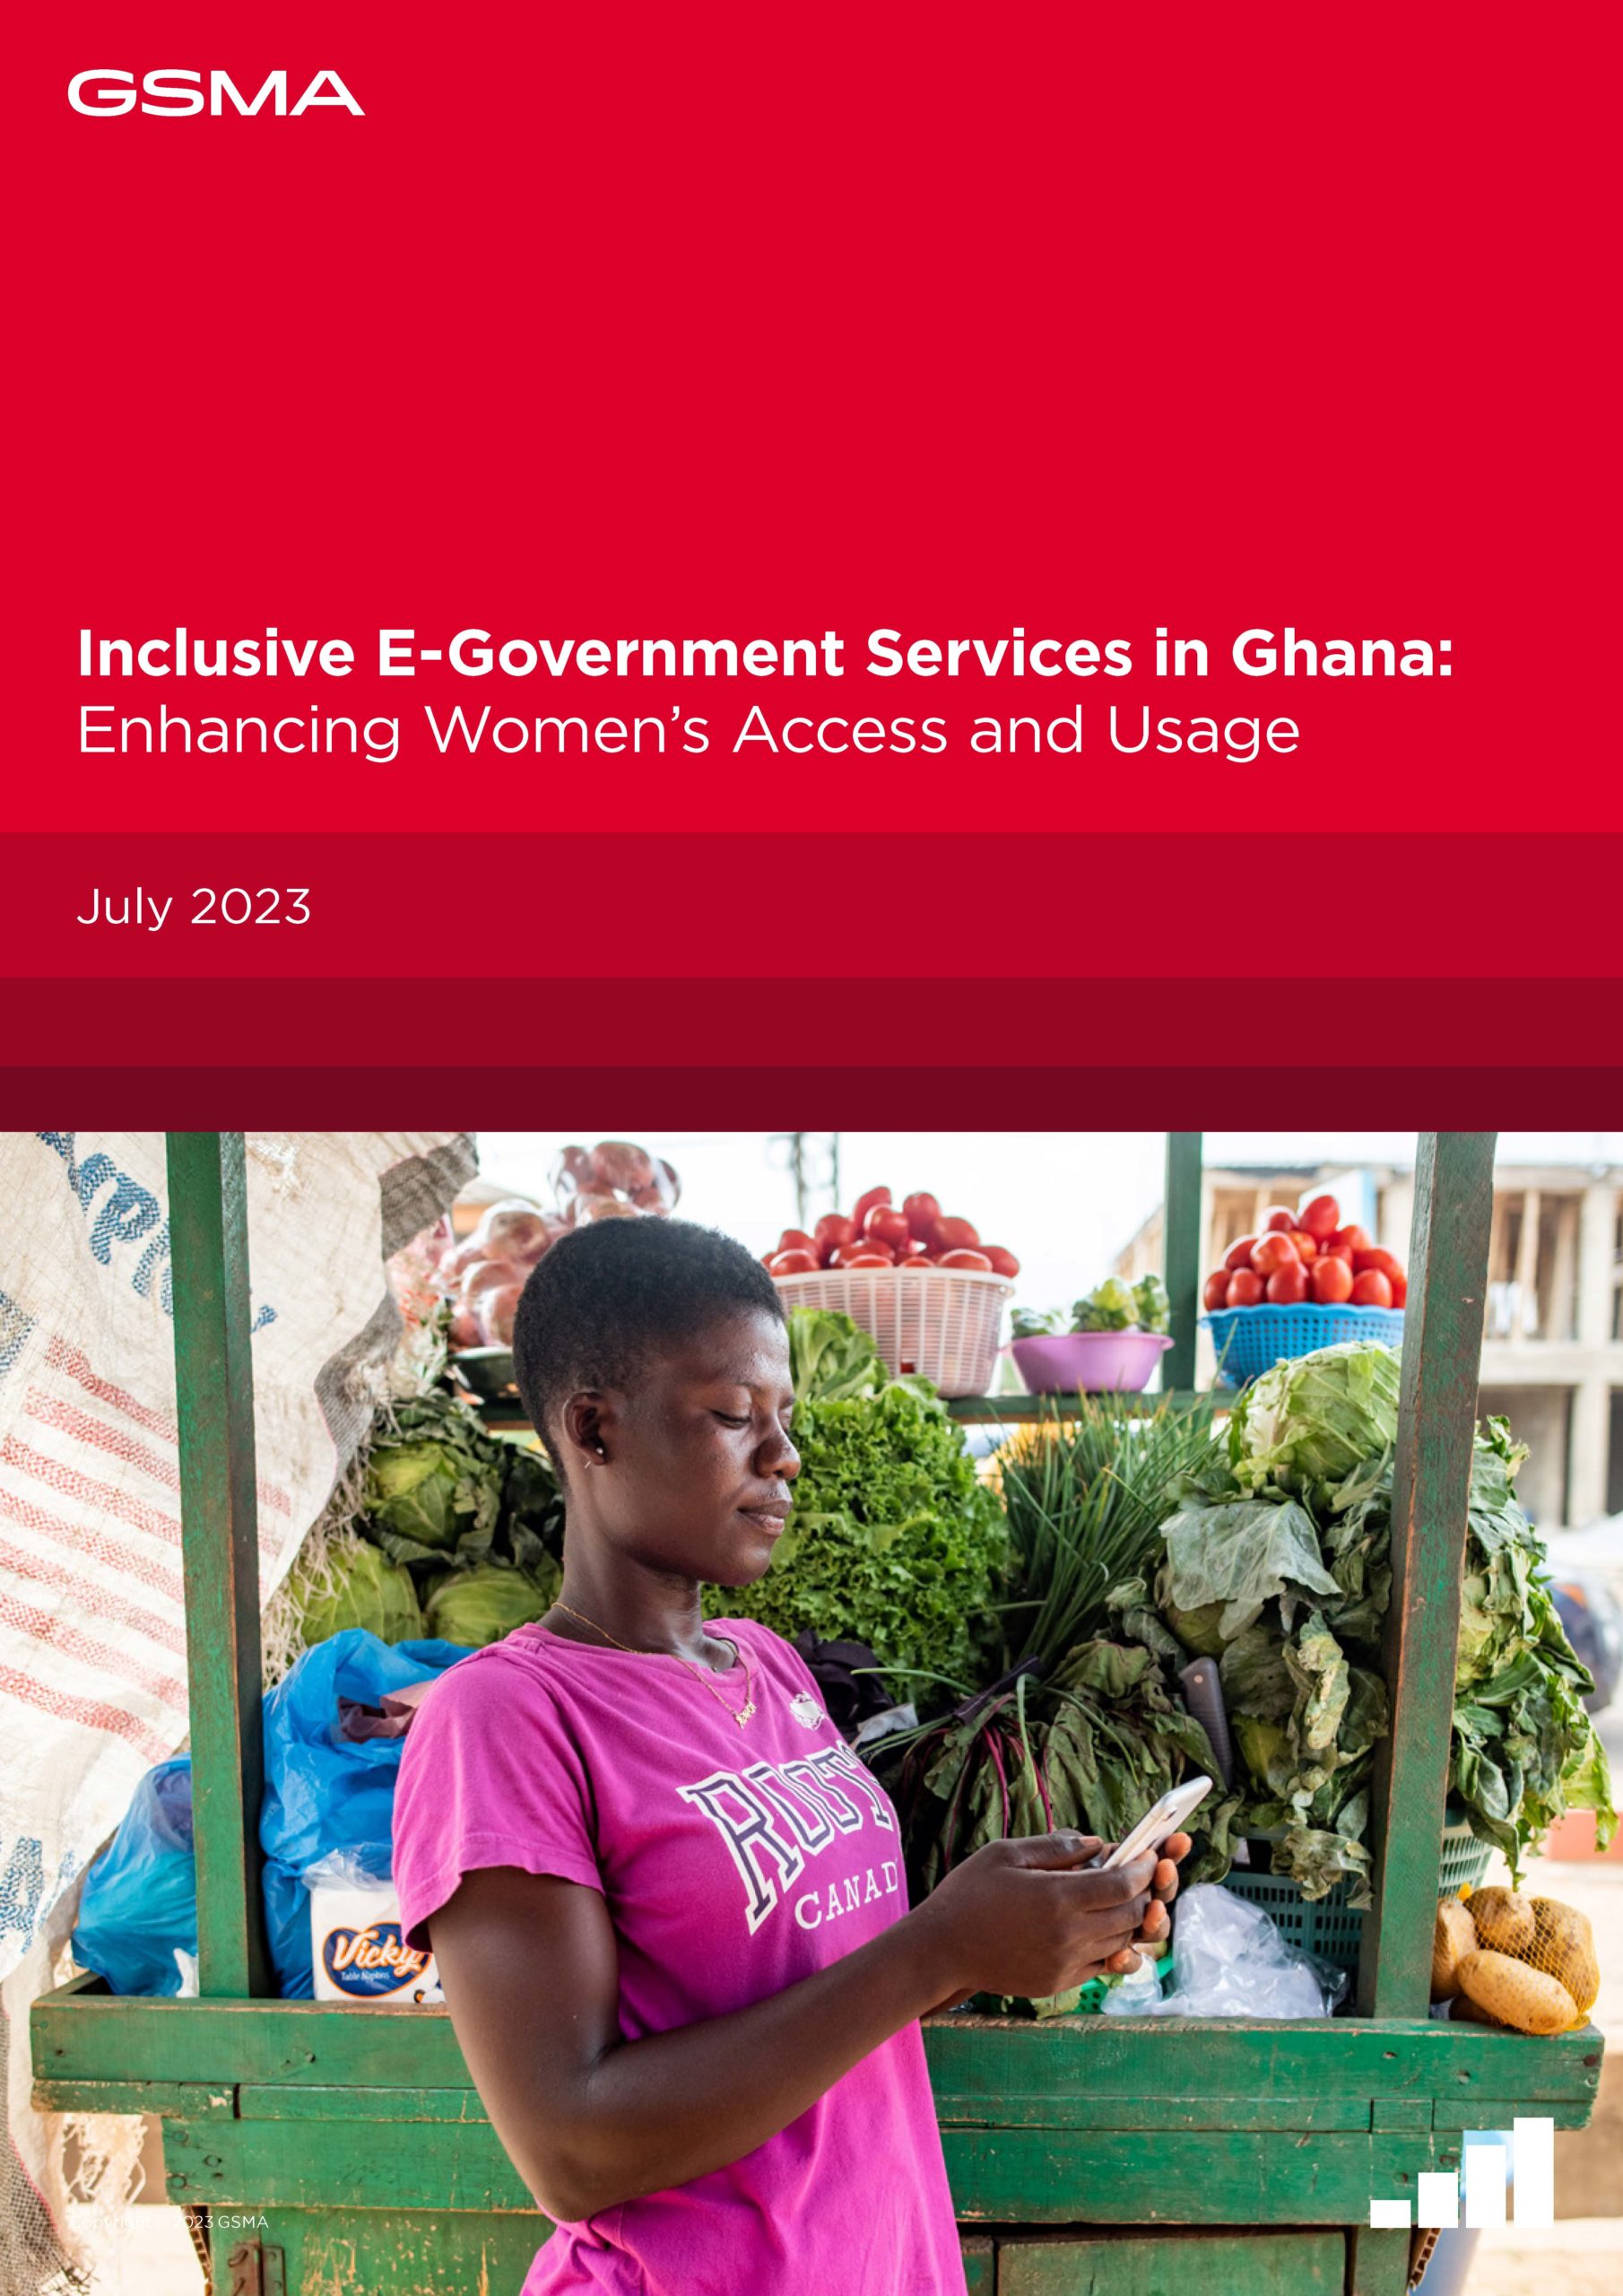 GSMA, Inclusive E-Government Services in Ghana: Enhancing Women's Access  and Usage